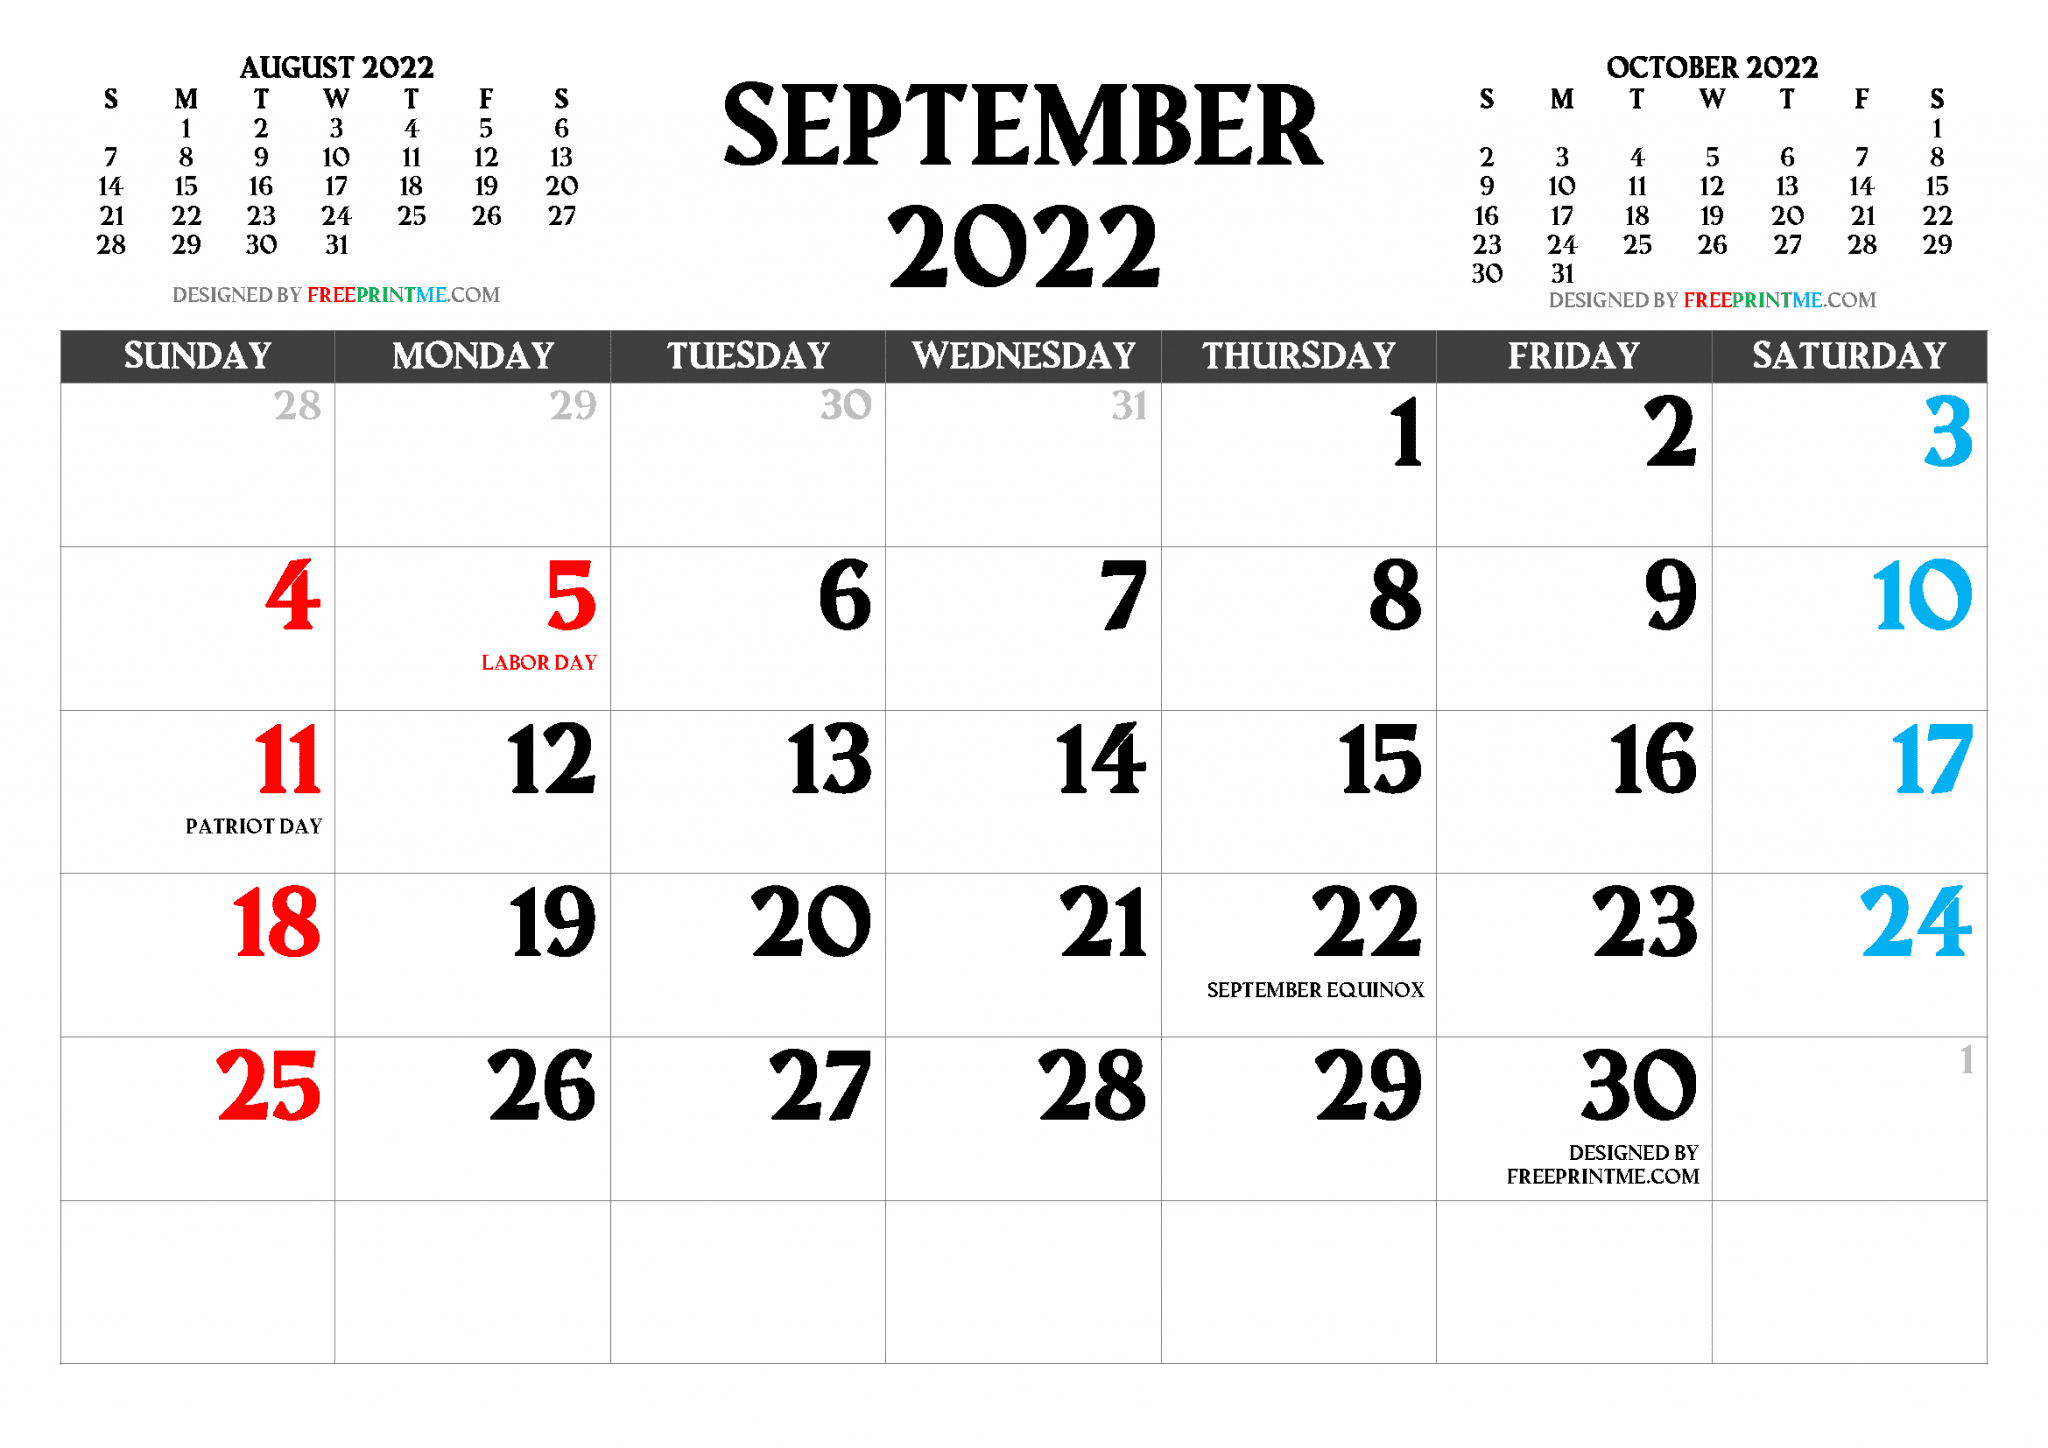 free-printable-2022-monthly-calendar-with-holidays-july-december